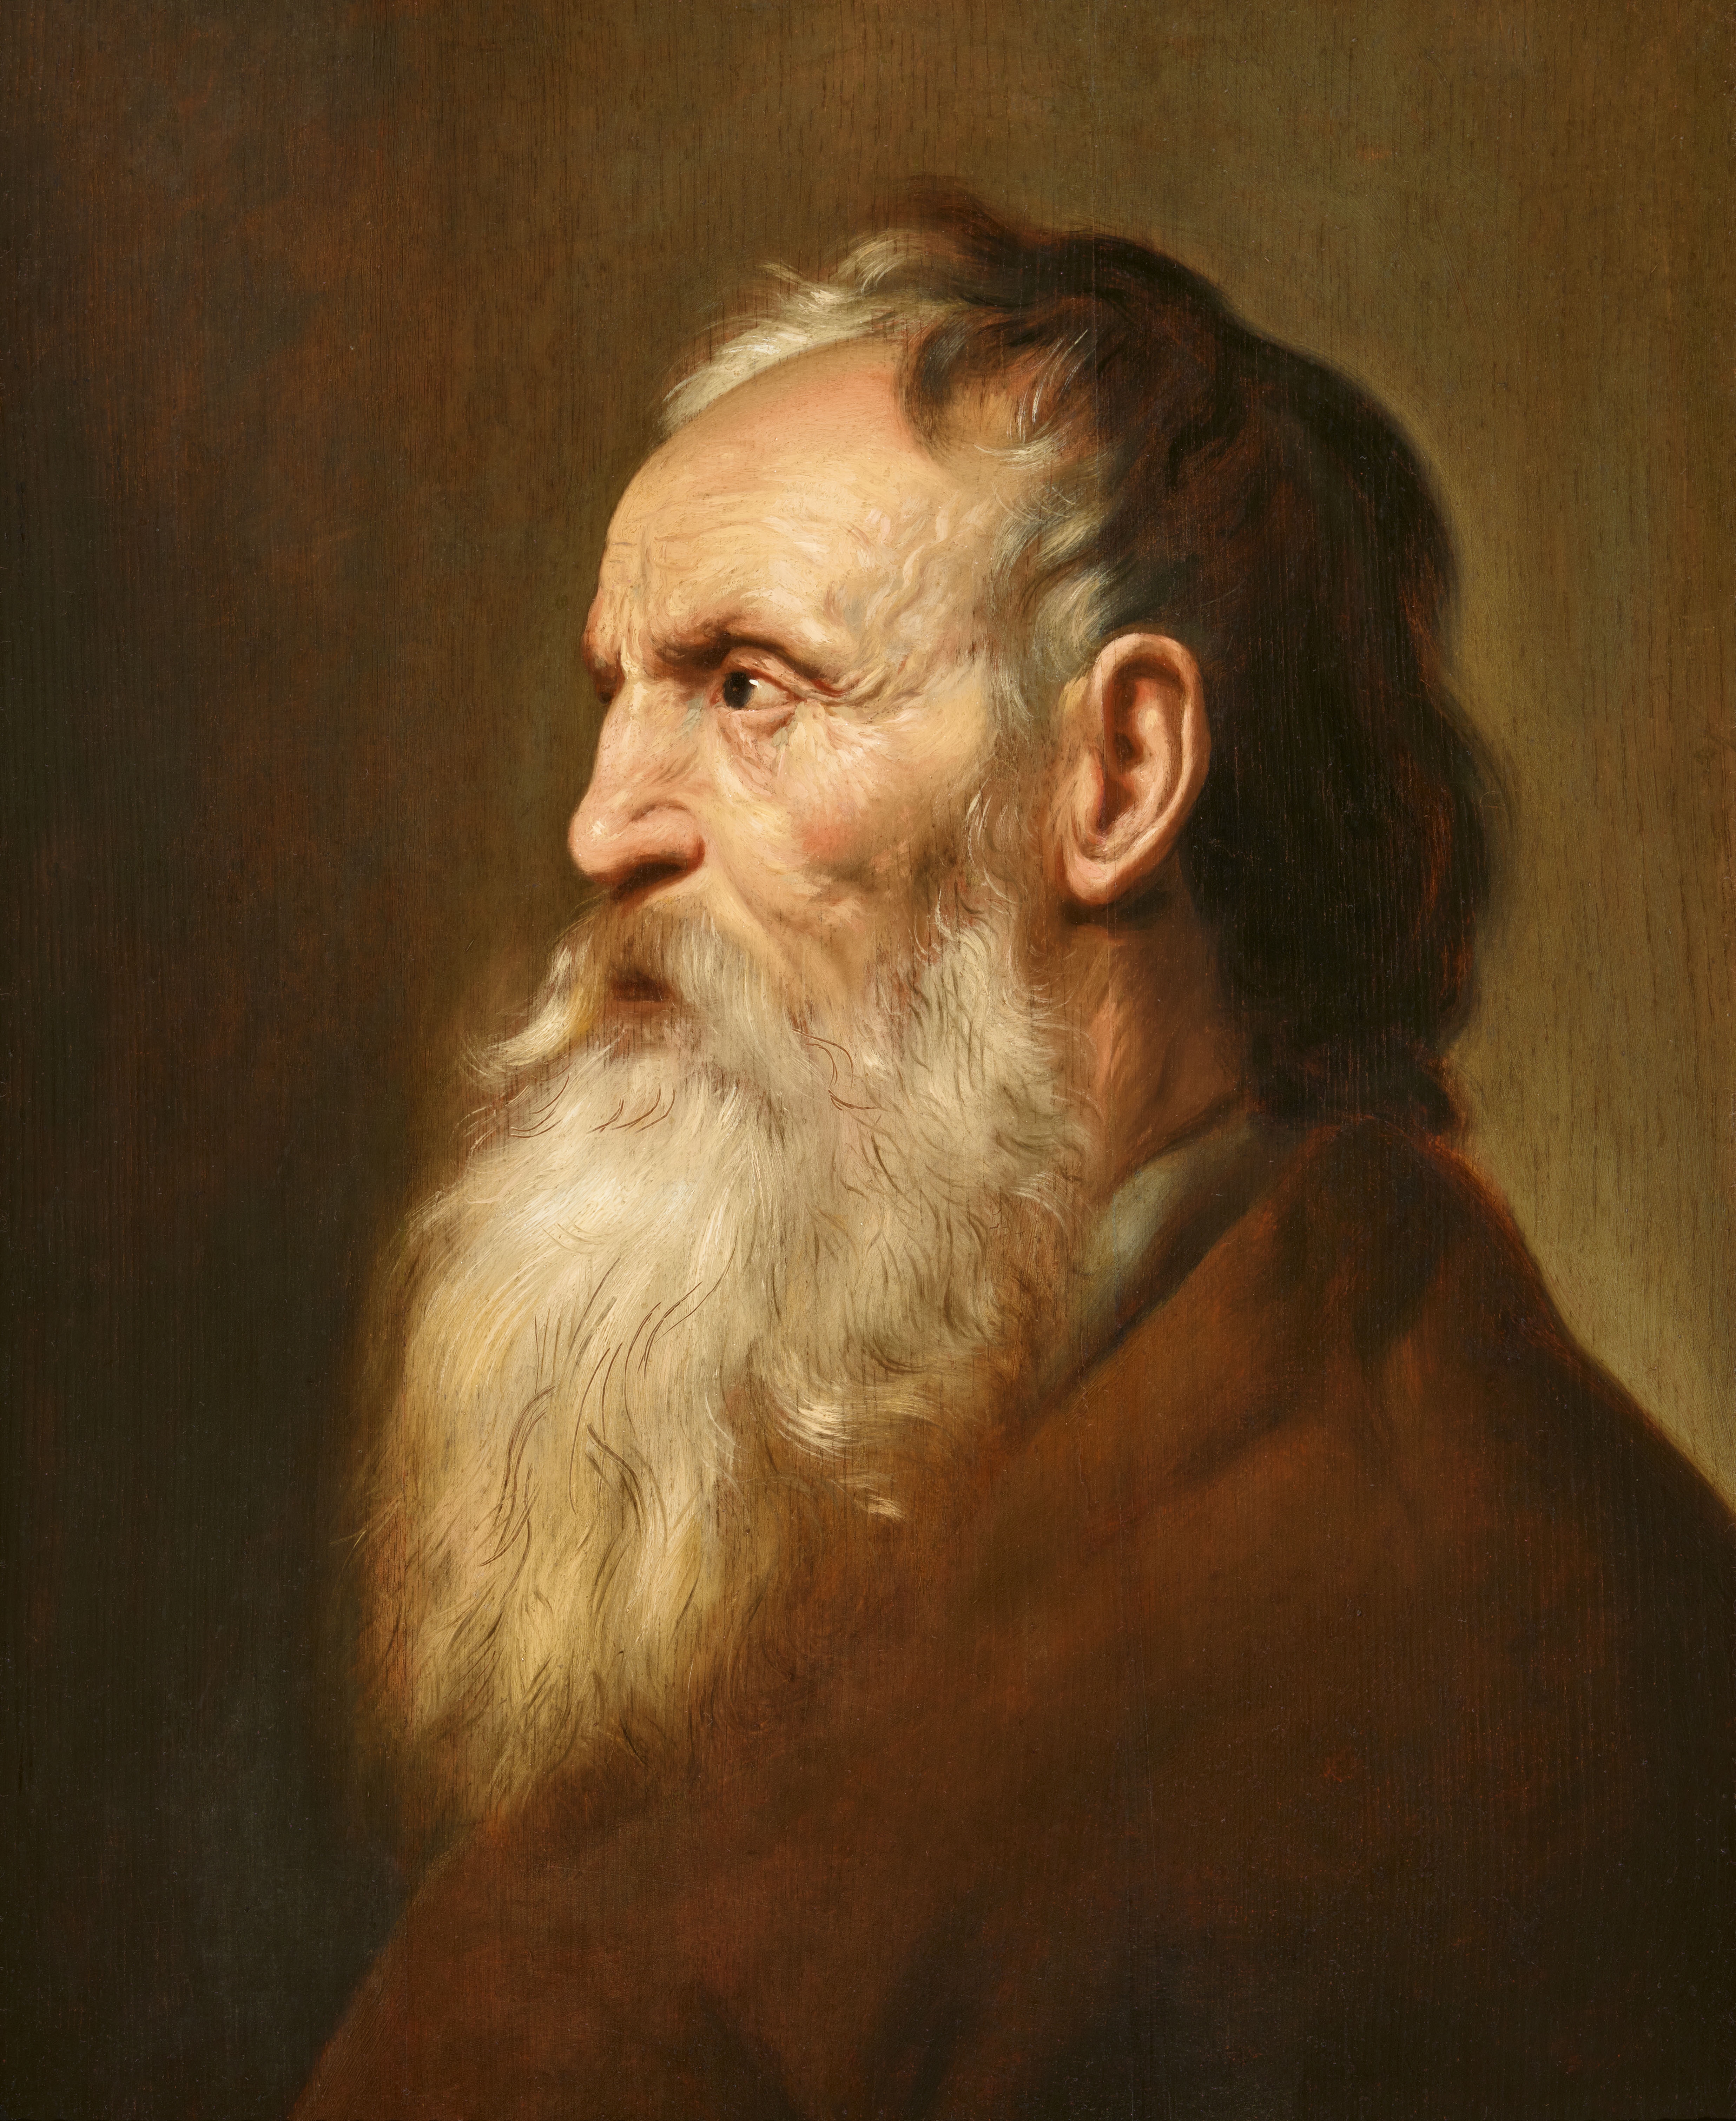 Artwork by Jan Lievens, Portrait of a Bearded Man, Made of Oil on panel